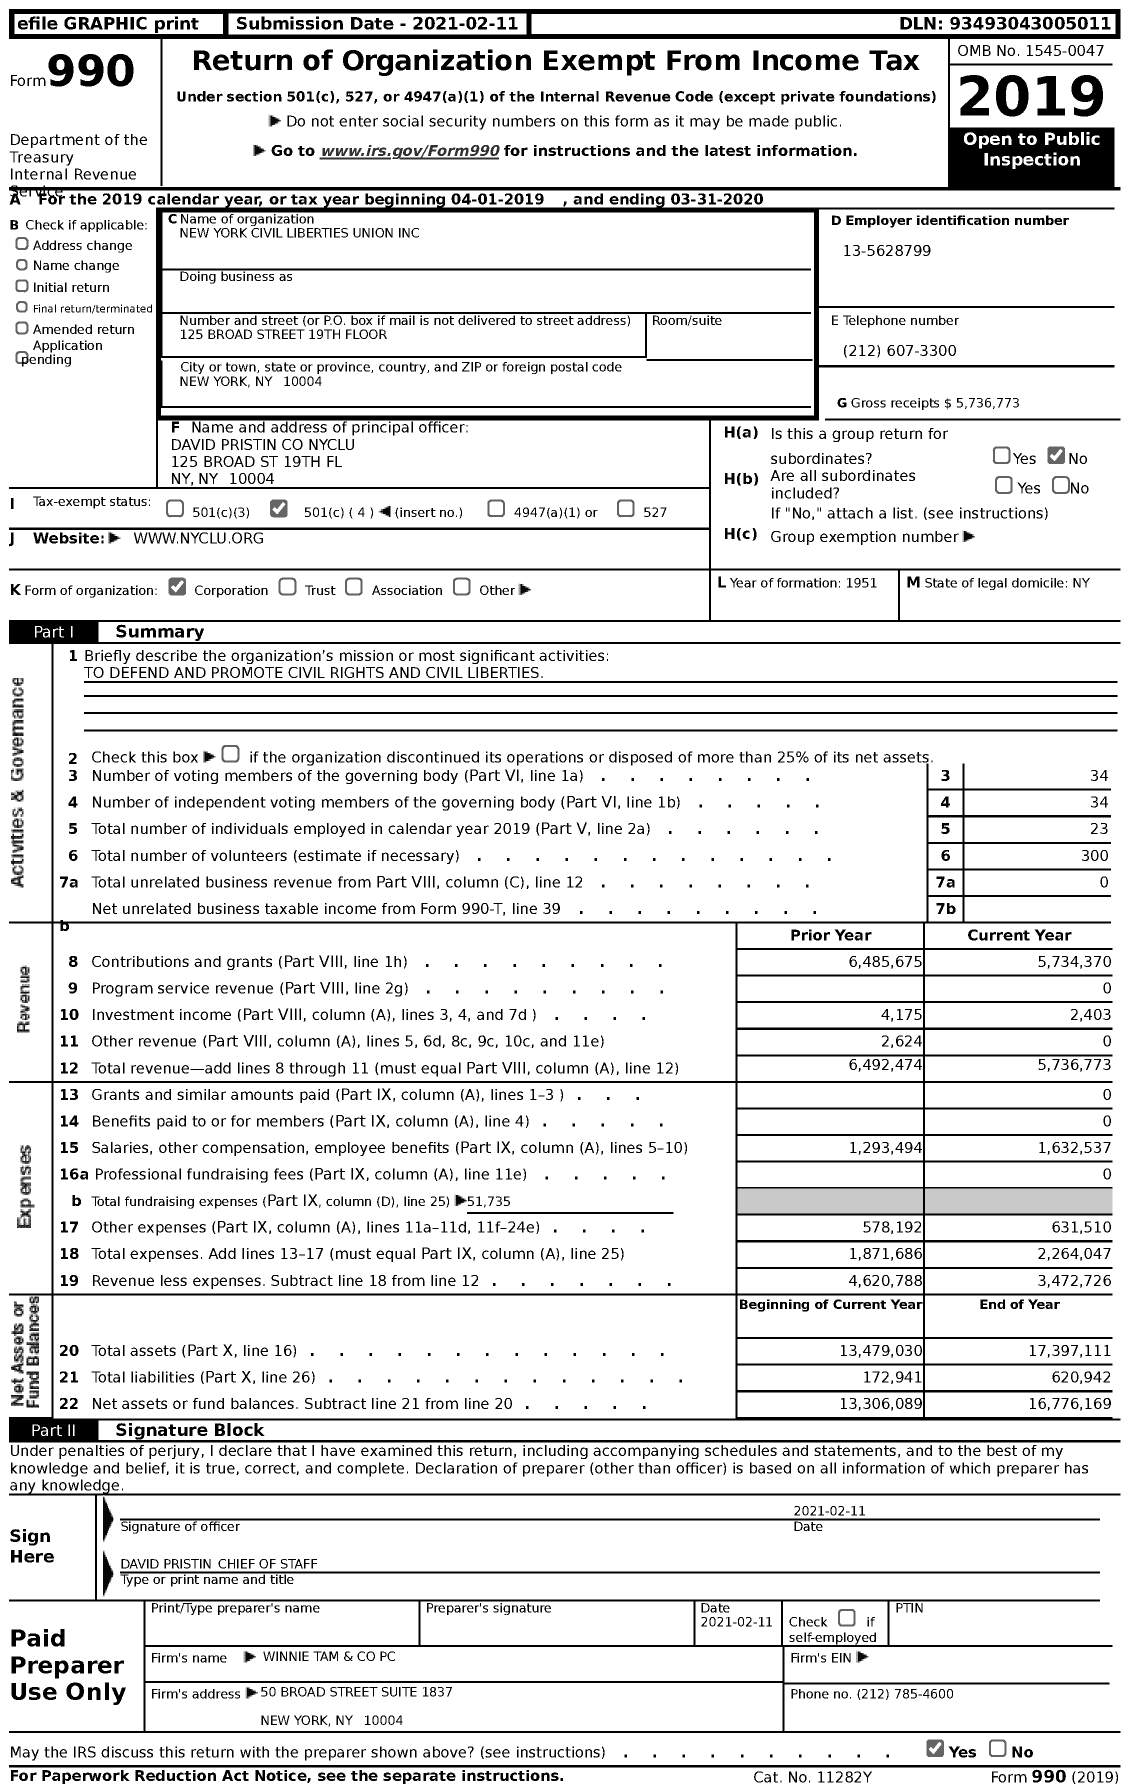 Image of first page of 2019 Form 990 for New York Civil Liberties Union (NYCLU)